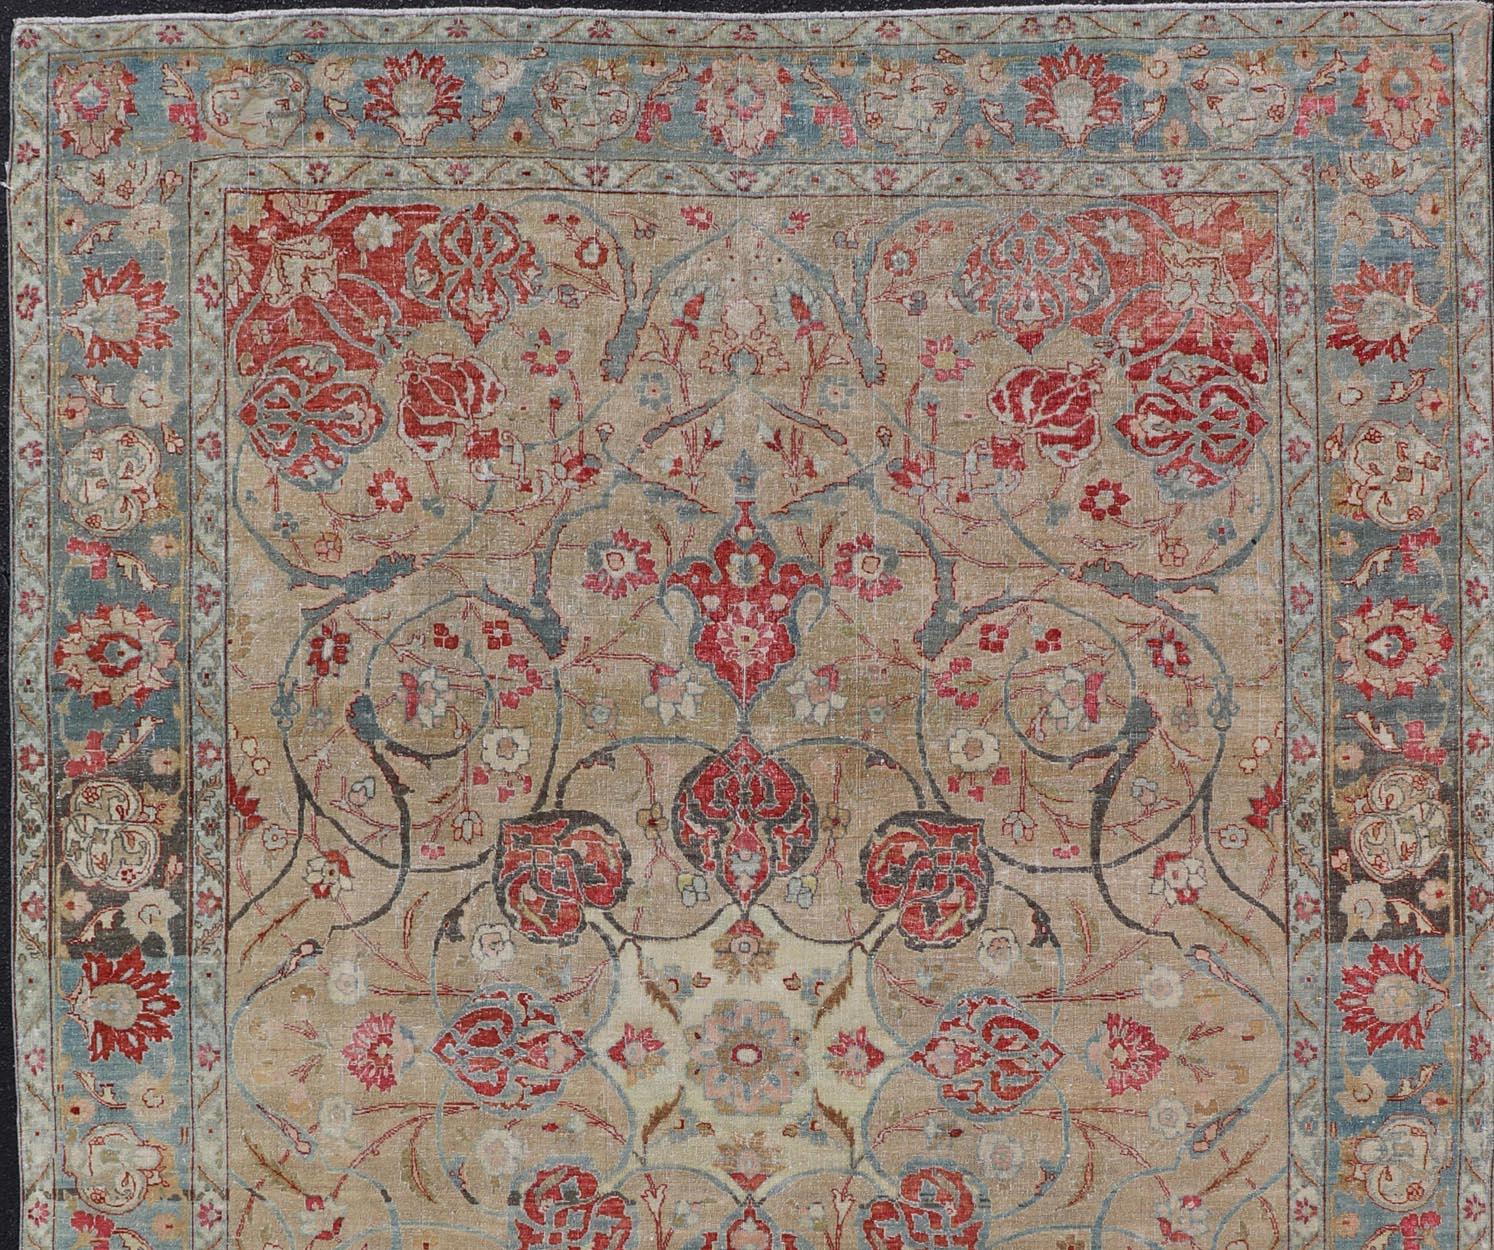 Wool Antique Persian Tabriz Rug with Floral Medallion Design in Tan, Red, and Blue For Sale